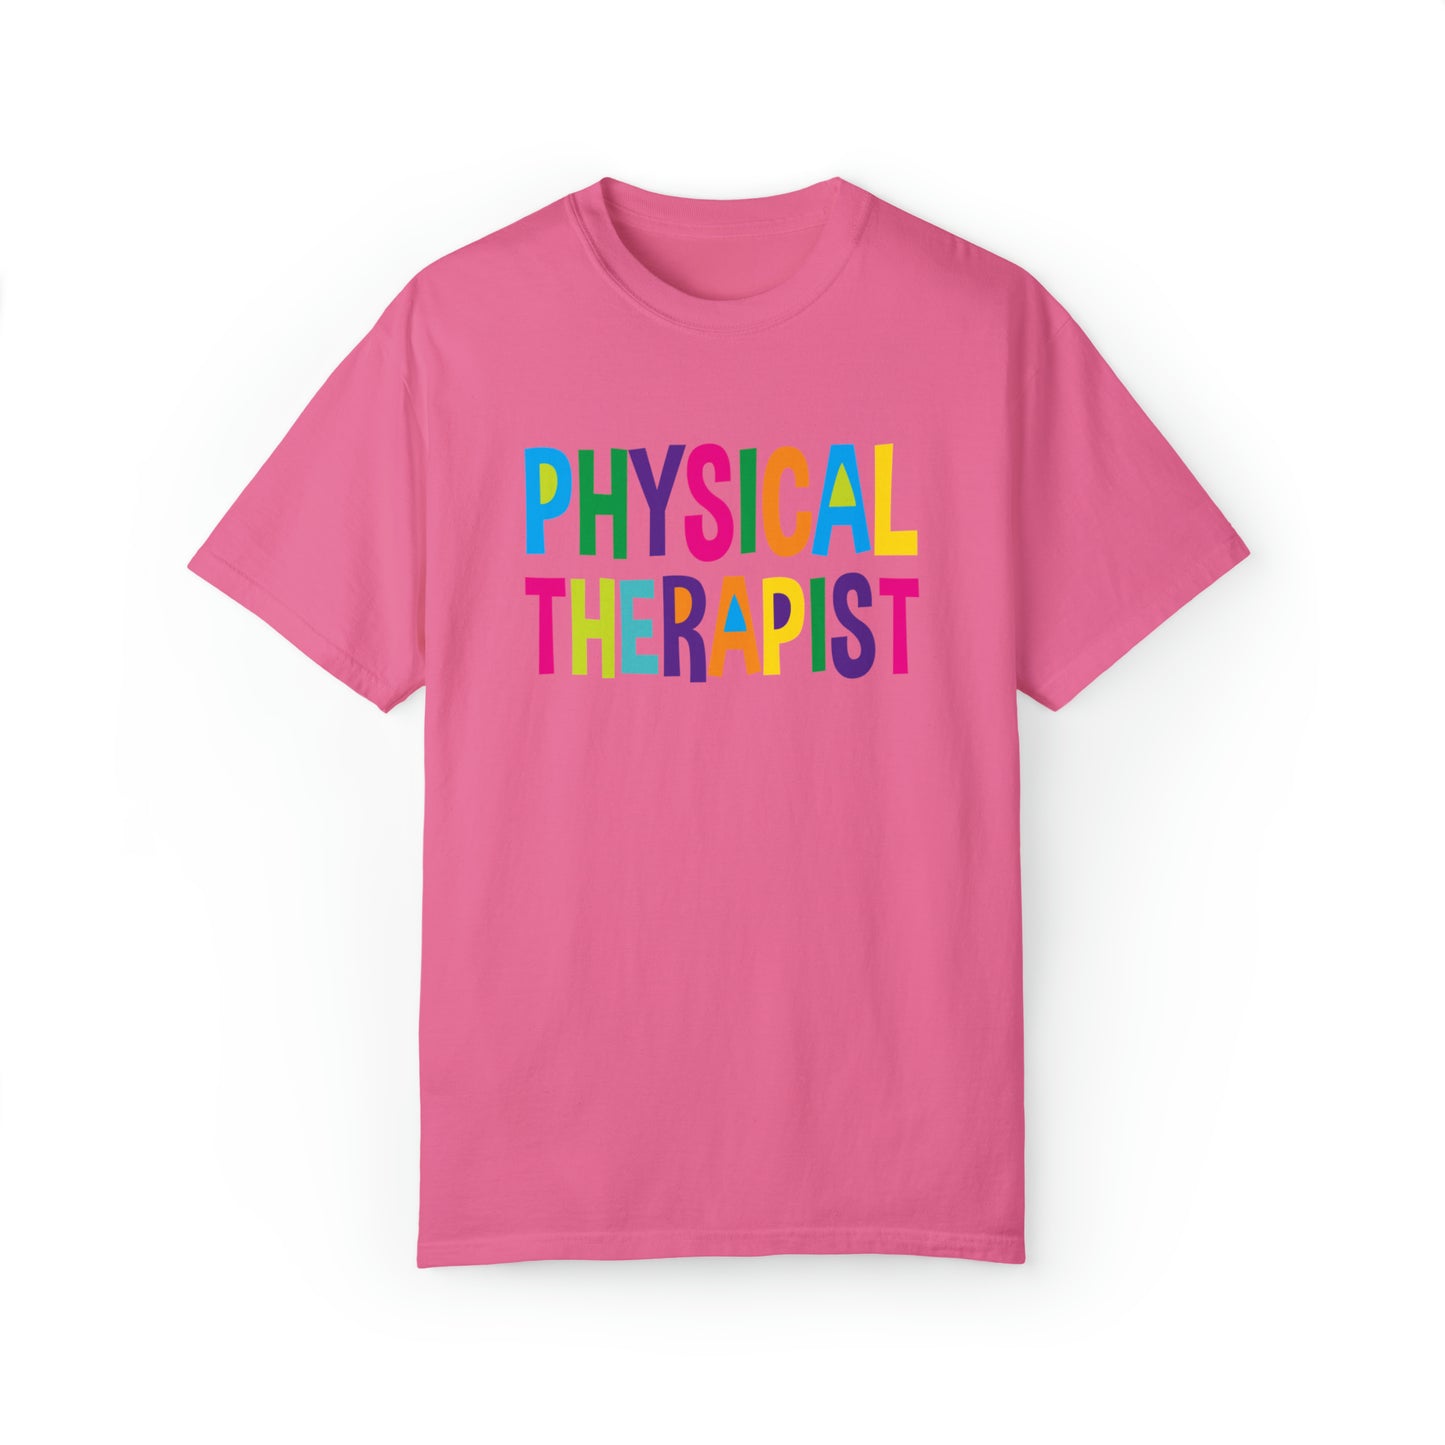 Physical Therapist - Comfort Colors 1717 Unisex Garment-Dyed T-shirt